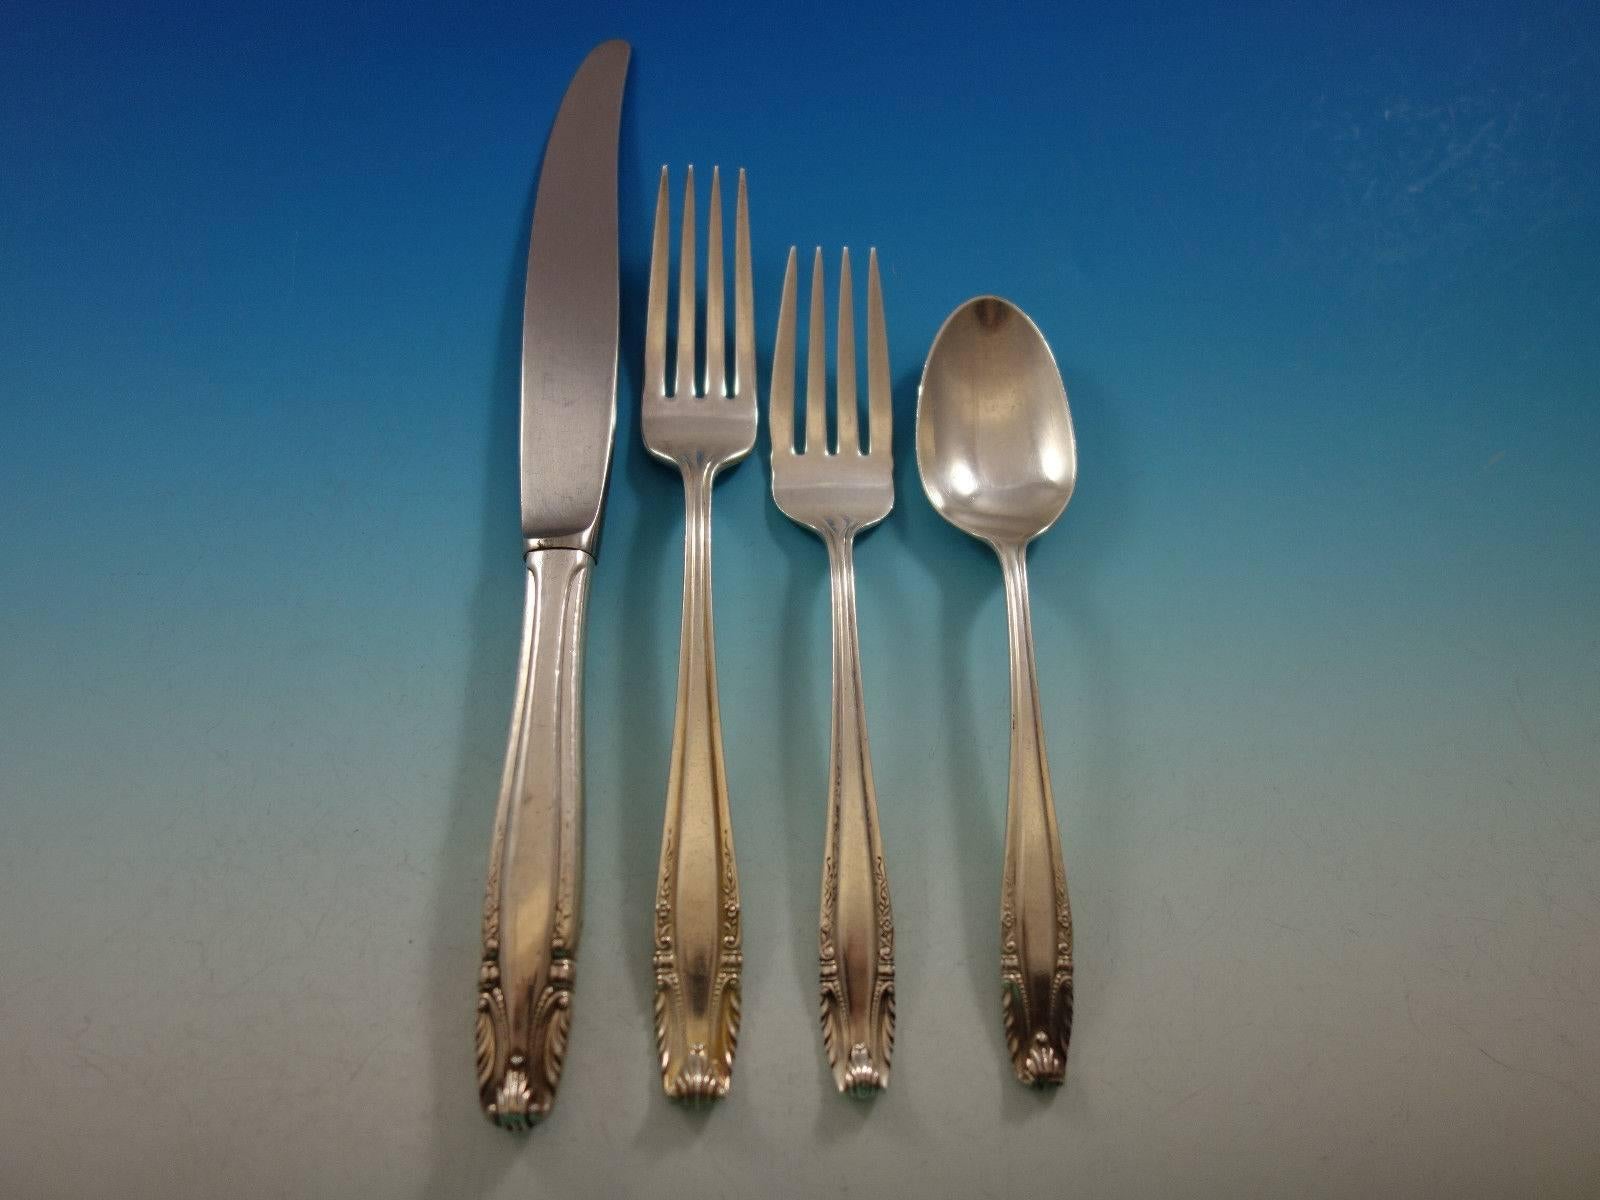 Stradivari by Wallace sterling silver flatware set of 90 pieces. This set includes: 

12 knives, 9 1/8